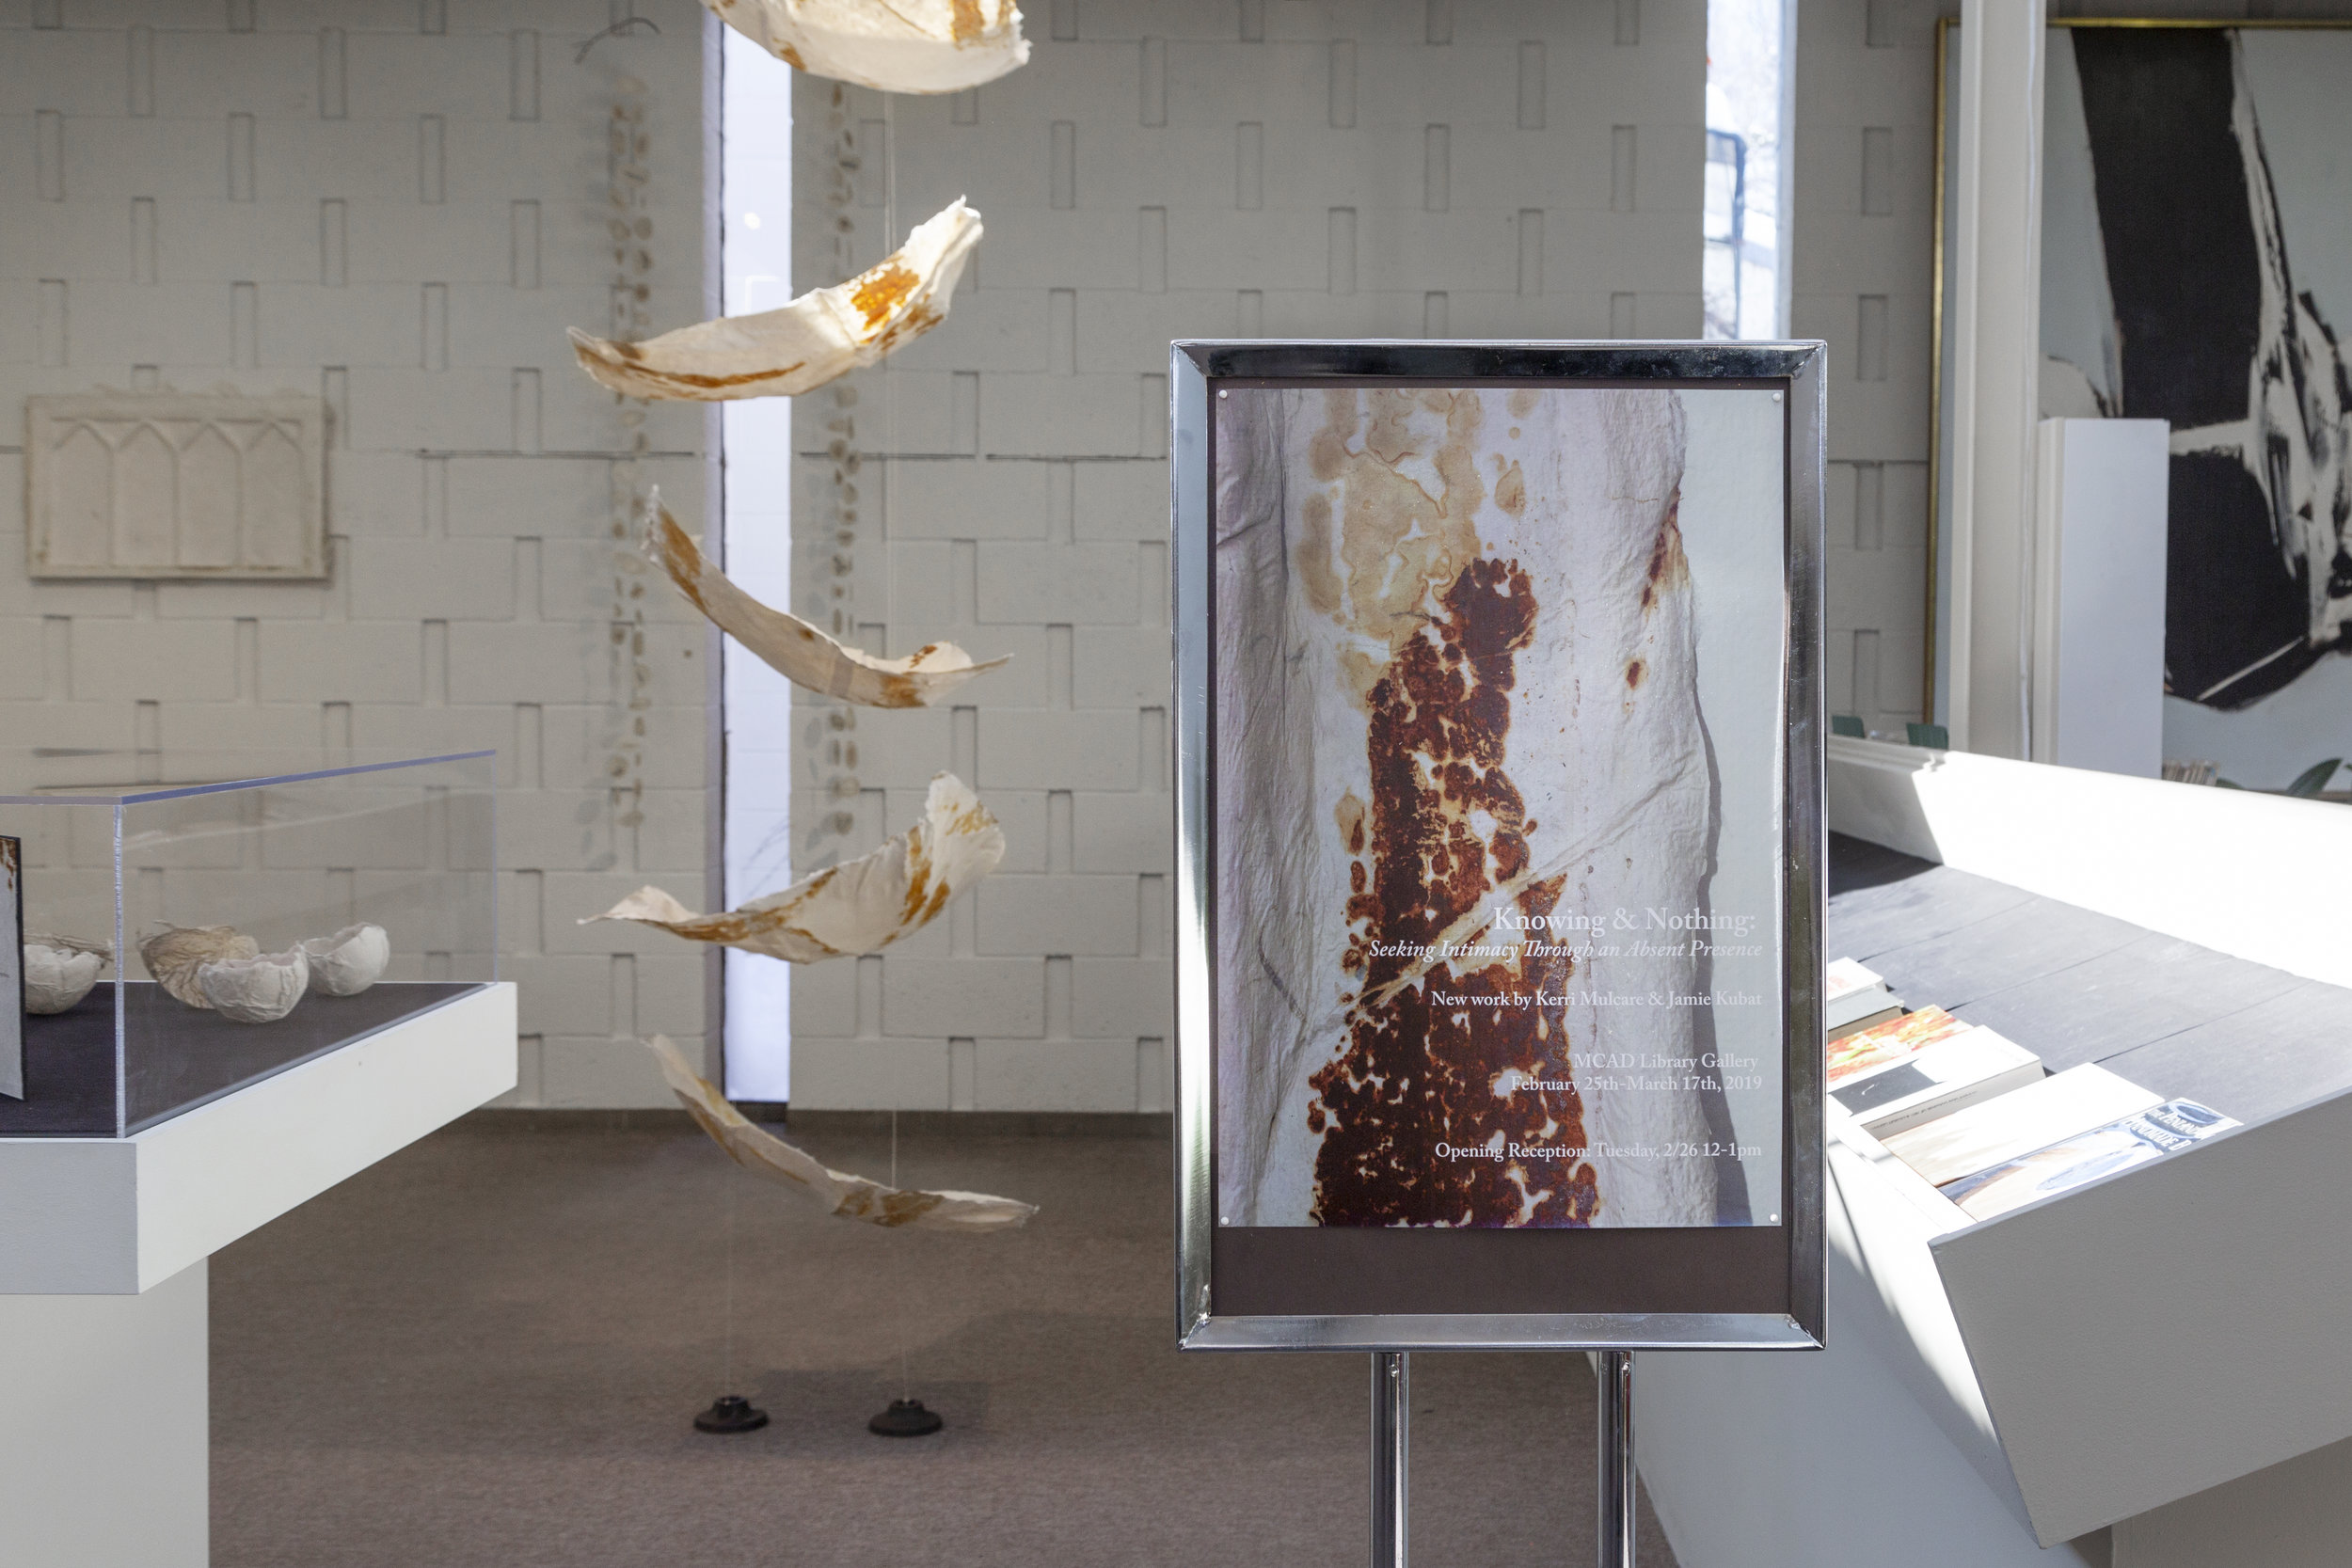  A collaborative exhibition with Jamie Kubat at The Minneapolis College of Art and Design Library Gallery, Spring 2019. The work in this exhibition explores themes around the body and memory through the materiality of cast paper and natural materials